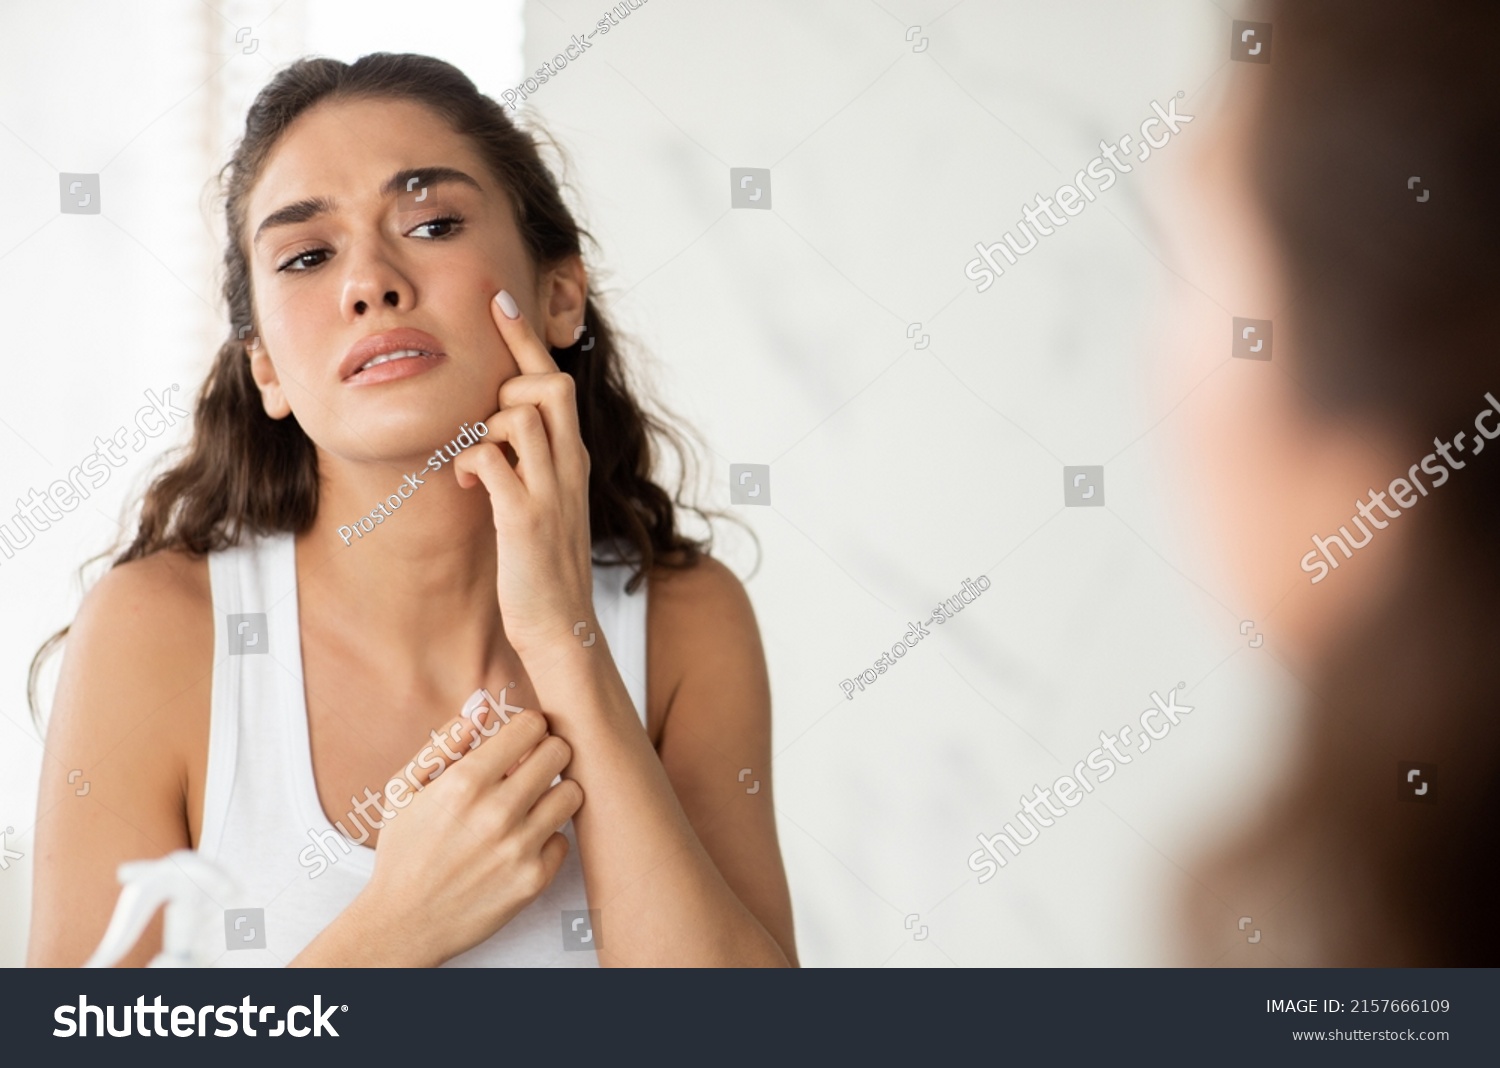 Skin Problem. Depressed Woman Touching Pimple On Face Looking At Mirror In Modern Bathroom. Facial Skin Issues, Medical Care And Treatment Concept. Selective Focus #2157666109